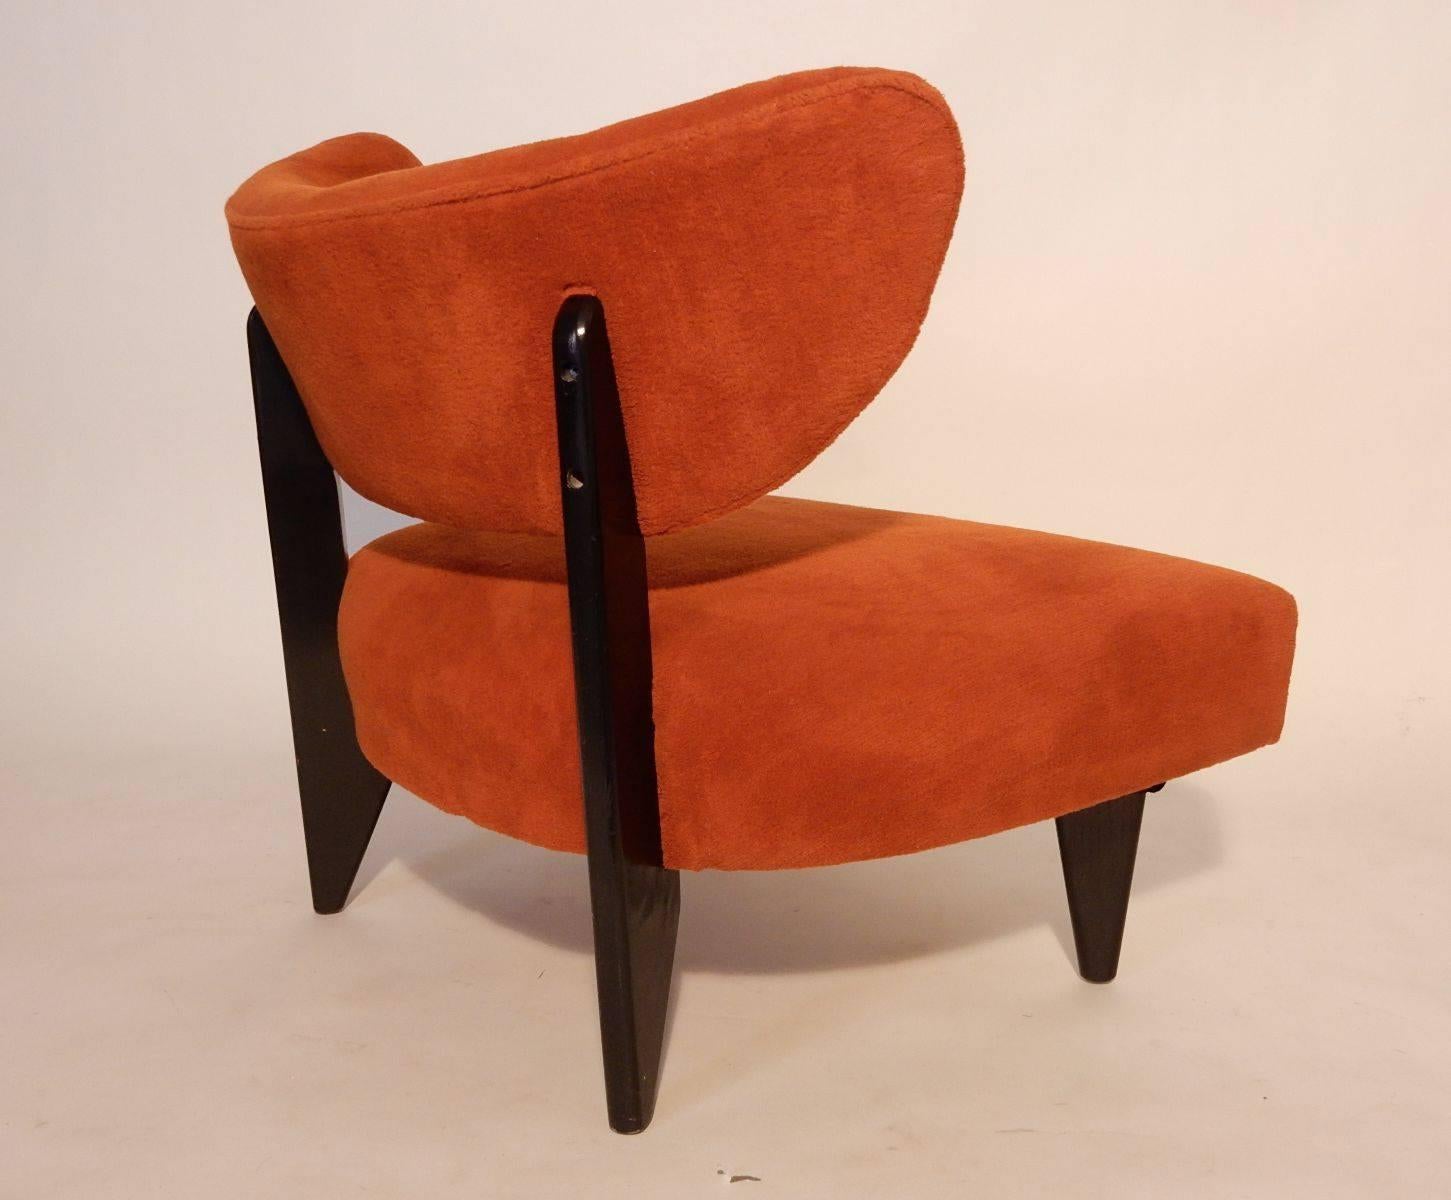 Incredible pair of low and wide 1950s lounge chairs in the manner of Billy Haines design.
Orange wool upholstery and ebonized oak legs appear to be all original. 
Very clean chairs and super comfortable. Marked 